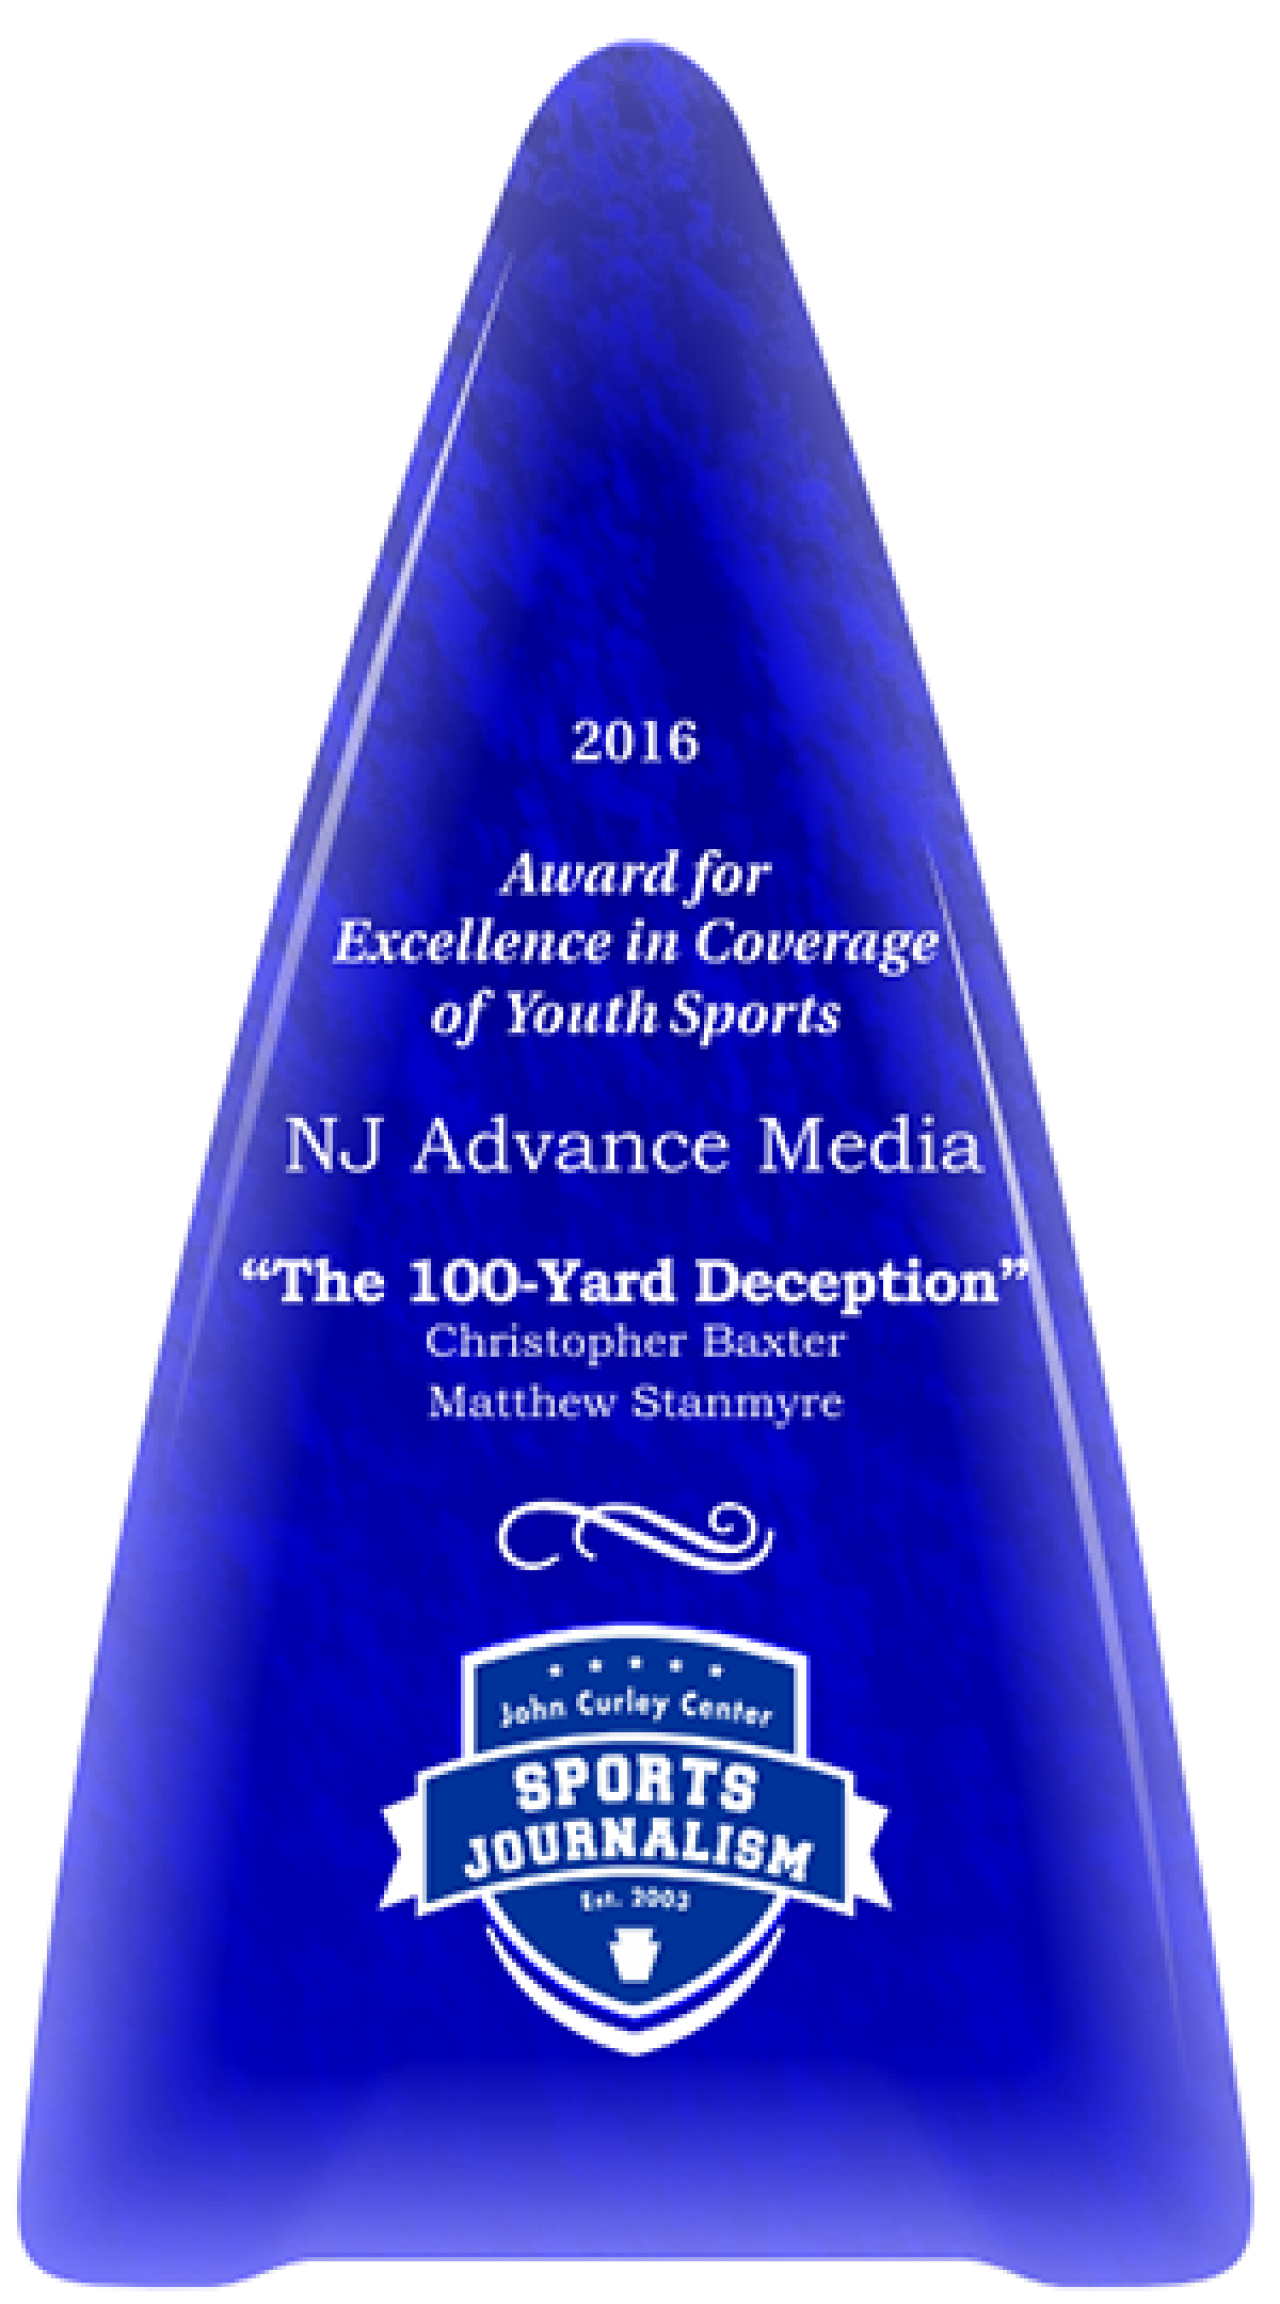 Award for Excellence in Youth Sports award image, blue triangular crystal